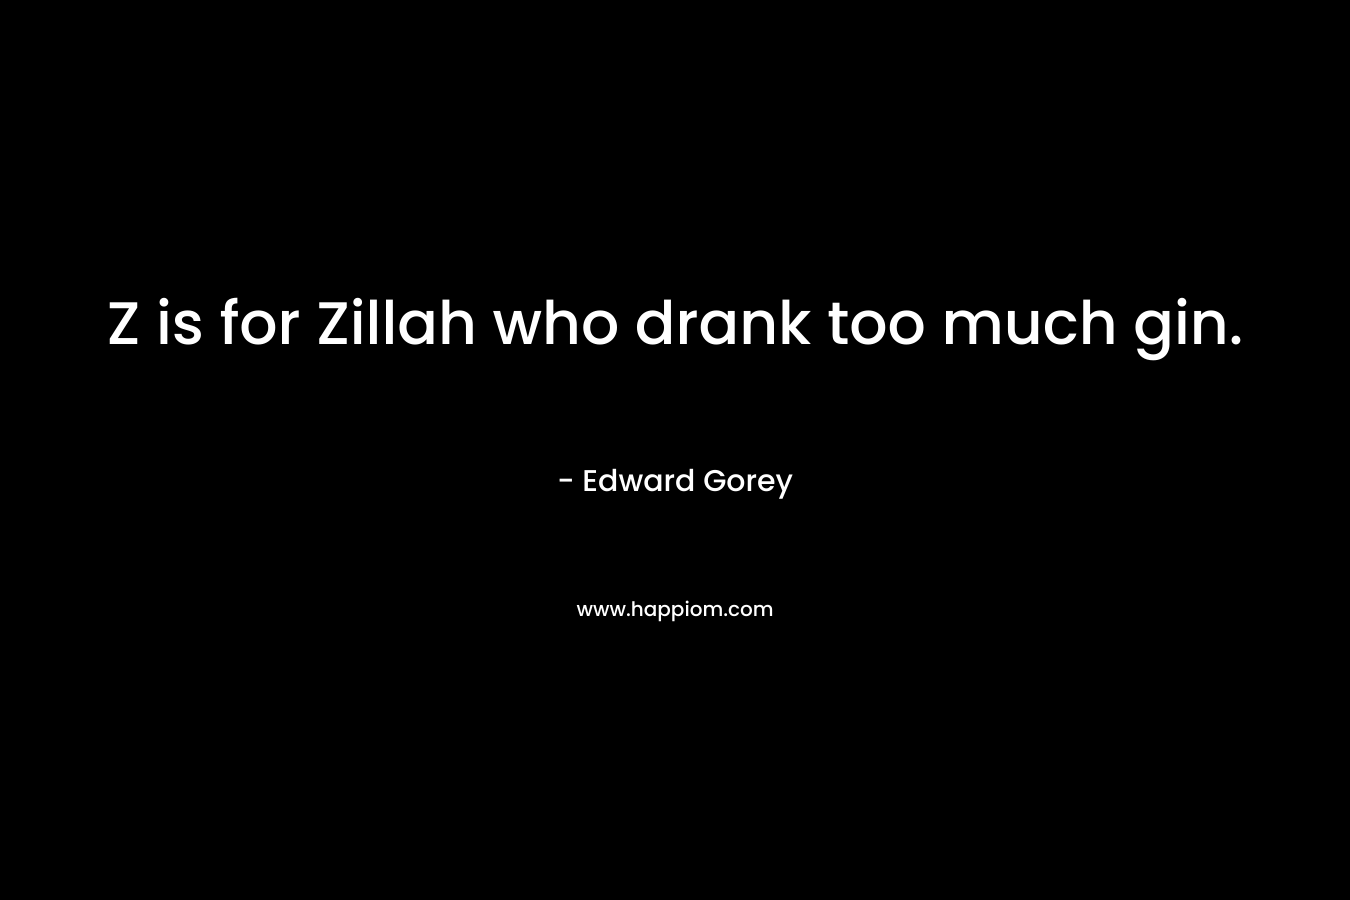 Z is for Zillah who drank too much gin. – Edward Gorey